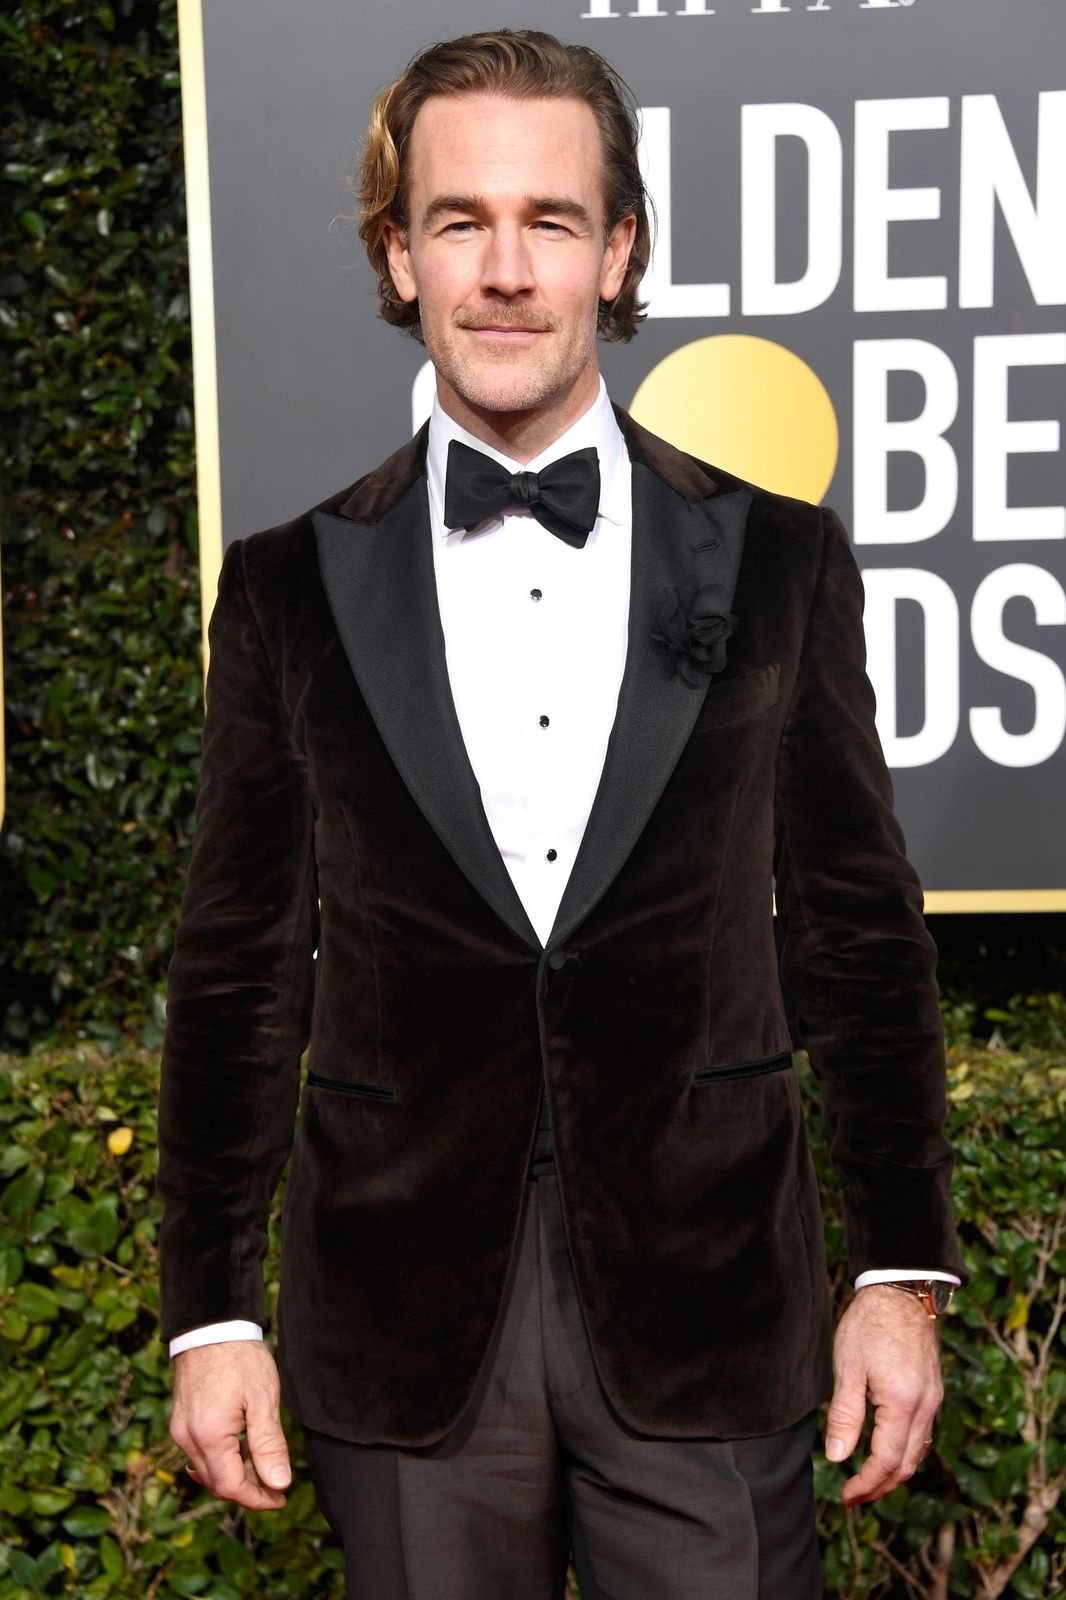 James Van Der Beek at the 76th Annual Golden Globe Awards at The Beverly Hilton Hotel on January 6, 2019 | Getty Images 